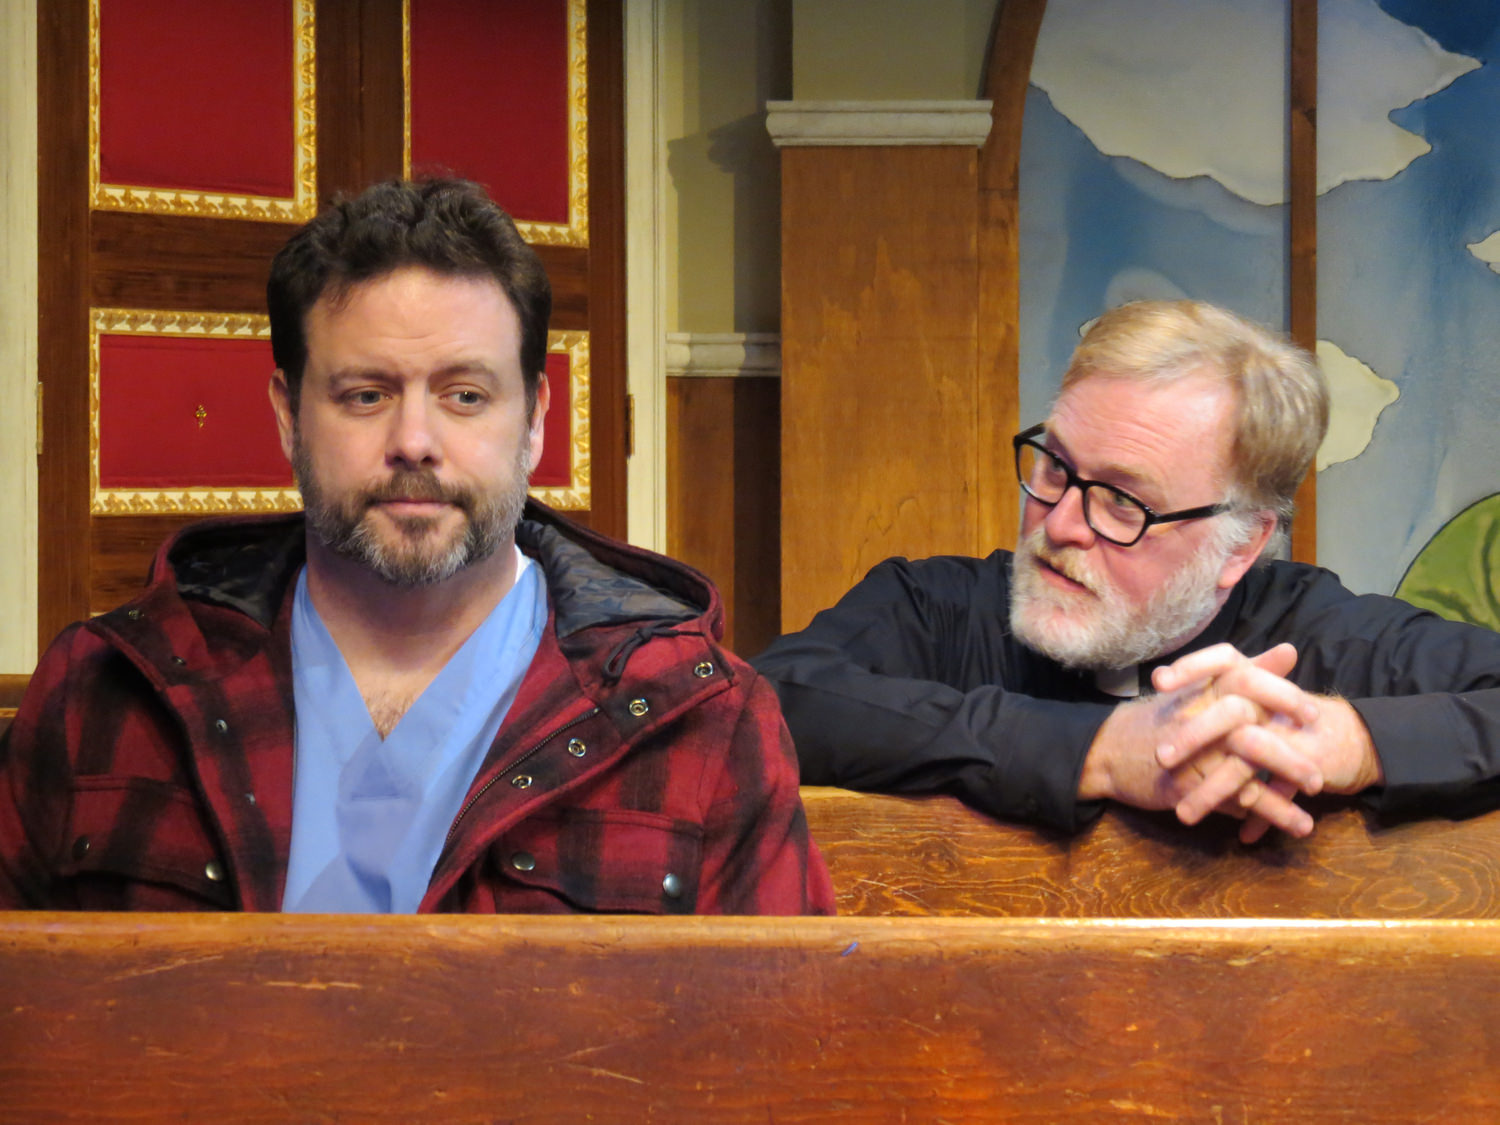 Ames Adamson and Jared Michael Delaney star in Joel Stone's thriller THE CALLING at NJ Rep. 4